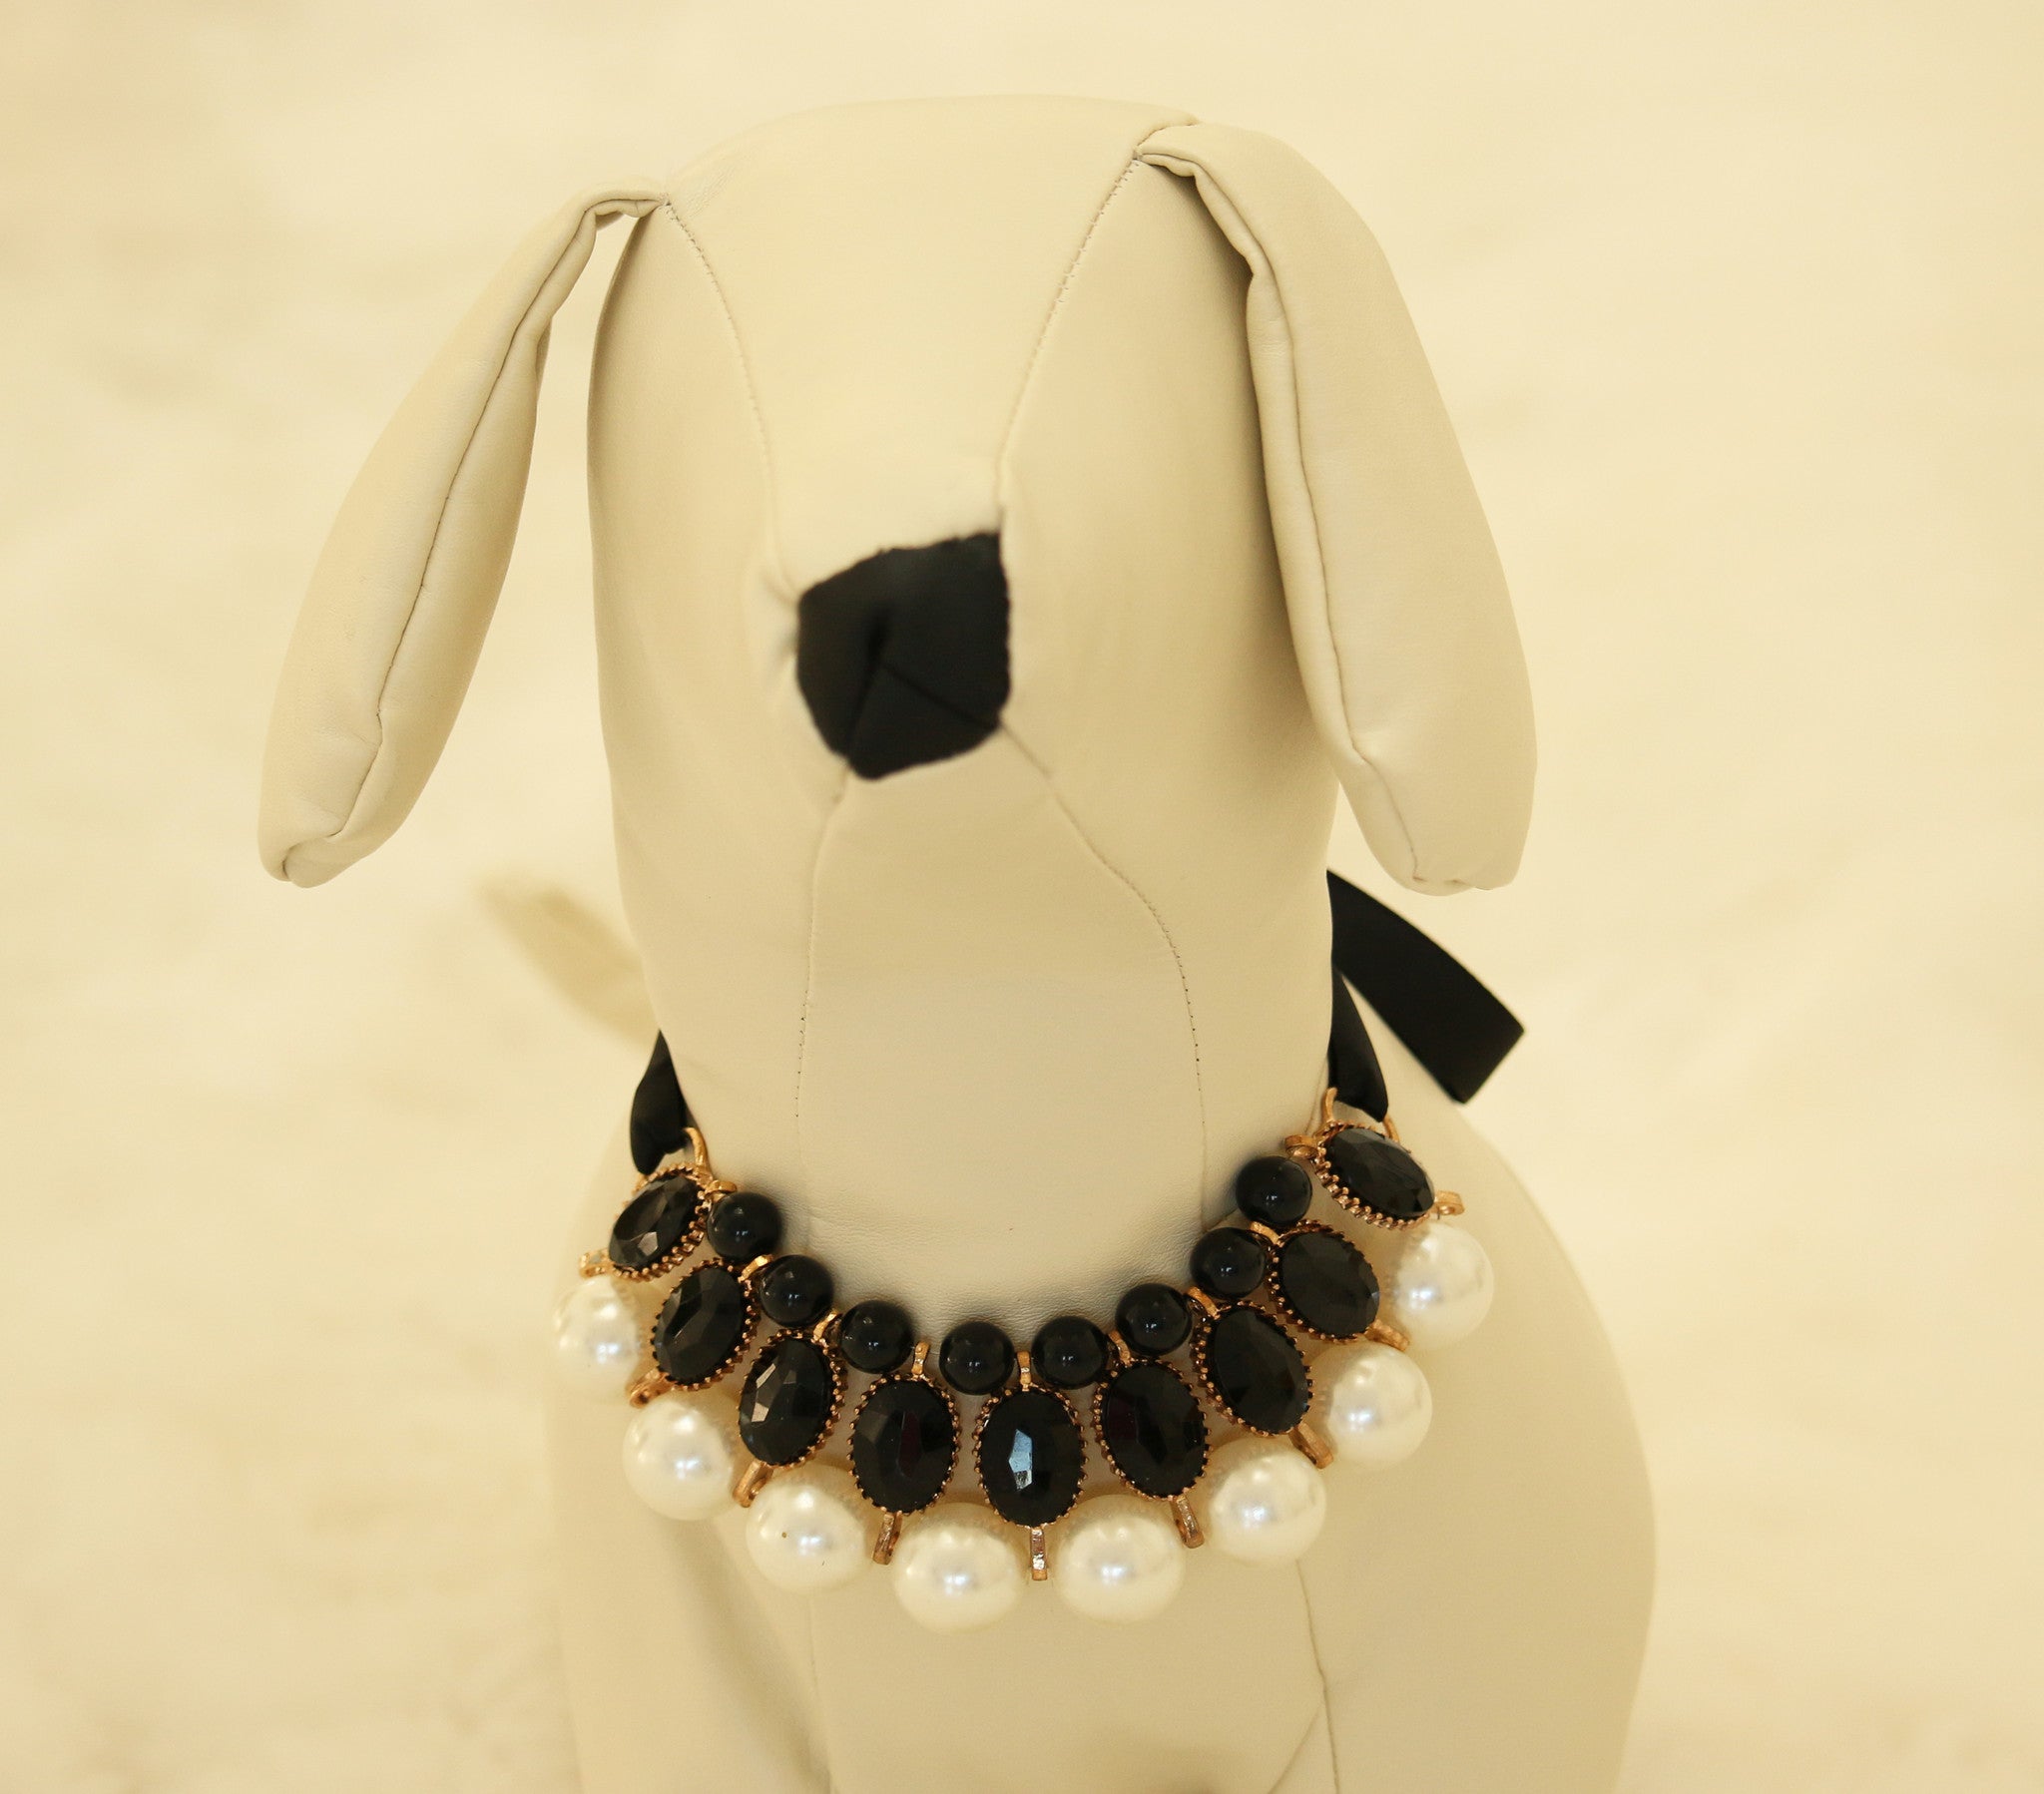 Amazon.com : Daovace Pearl Collar Beaded Dog Collar Handmade Fancy Dog  Collar with Bell Necklace Jewelry for Small Dogs Puppy (Small, Teal Bell) :  Pet Supplies